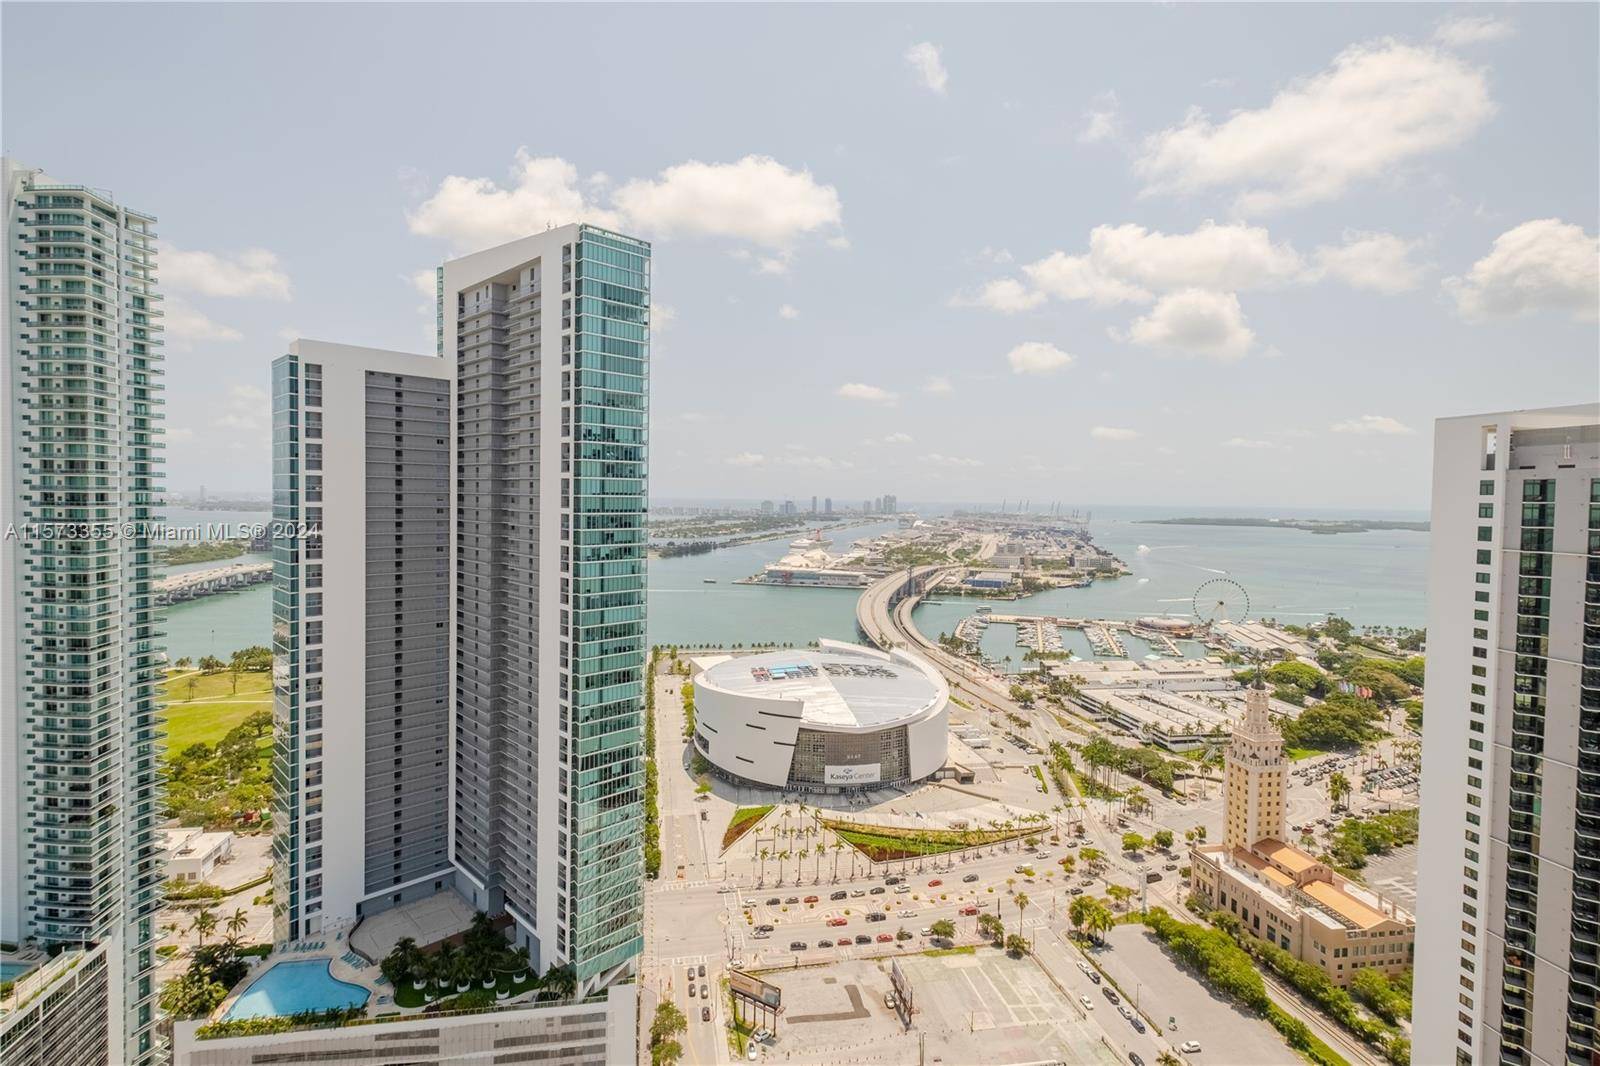 This stunning corner unit which features 3 bedrooms plus den convertible to 4th bedroom and 4 full bathrooms is in a prime location in Downtown Miami.